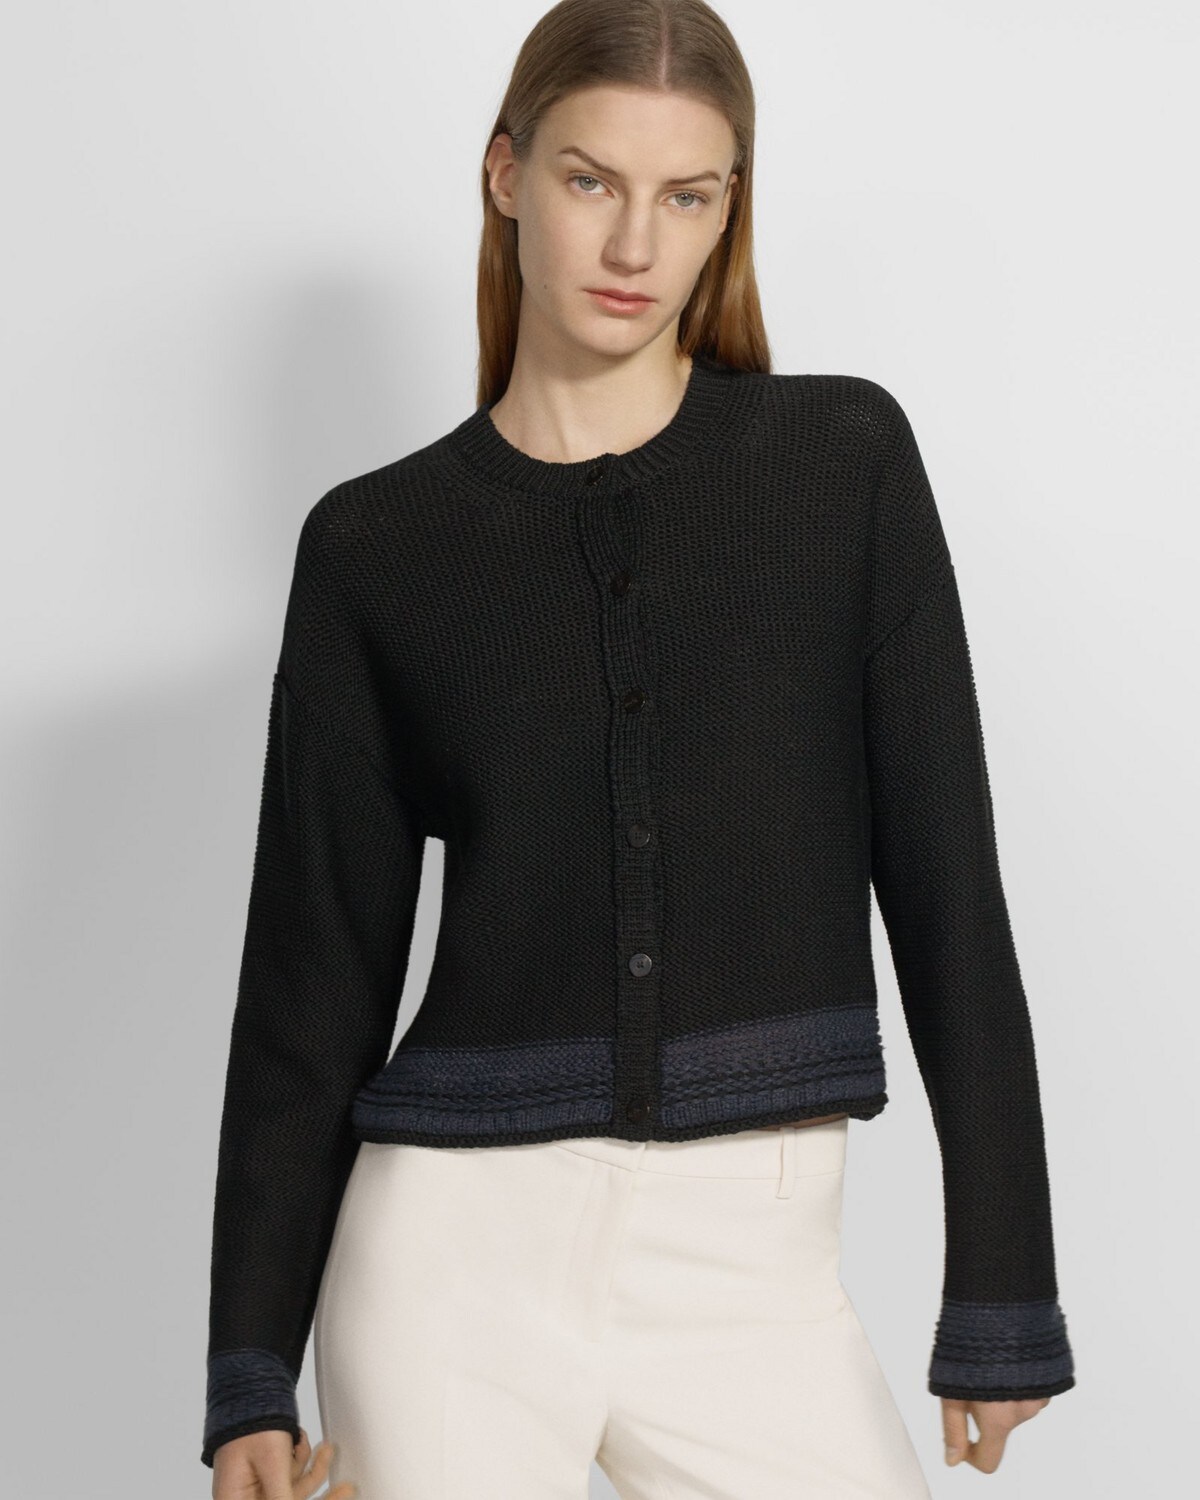 Women's Knitwear | Theory Official Site